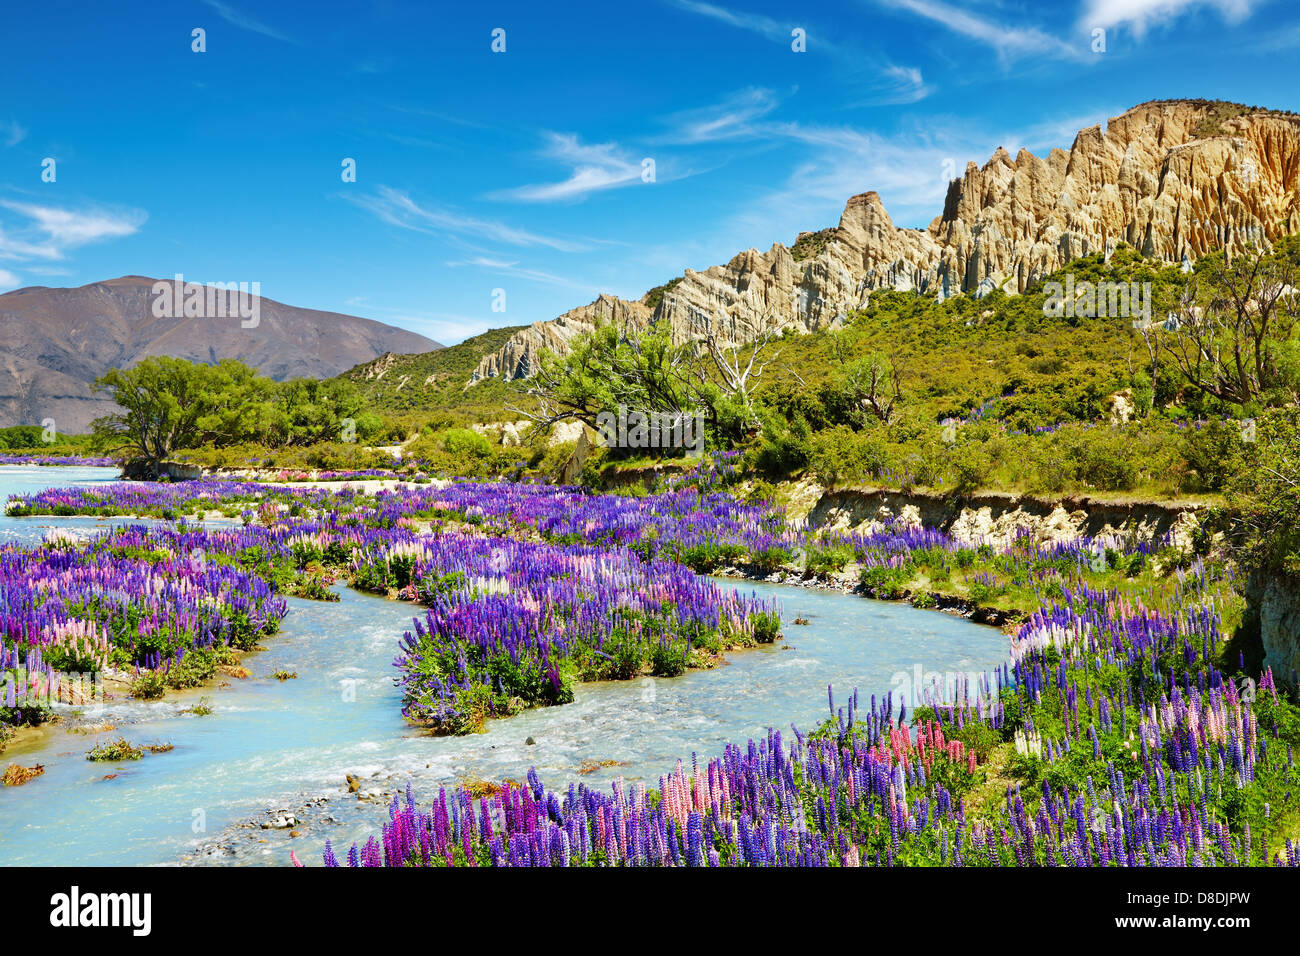 Landscape with colorful flowers, Clay Cliffs, New Zealand Stock Photo